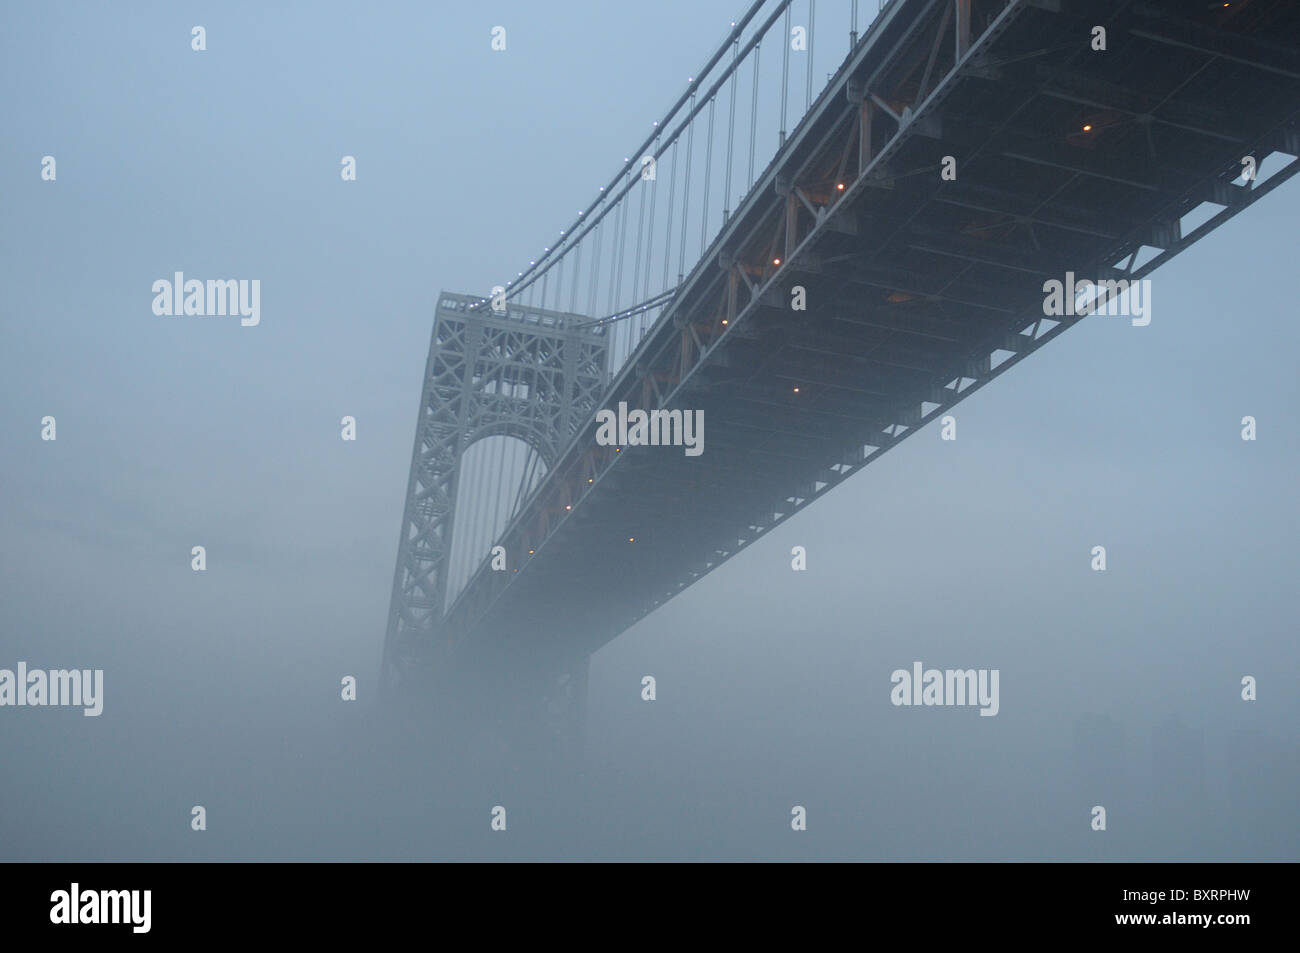 The George Washington Bridge, which spans the Hudson River between New York and New Jersey, in dense fog. Jan. 2, 2011 Stock Photo